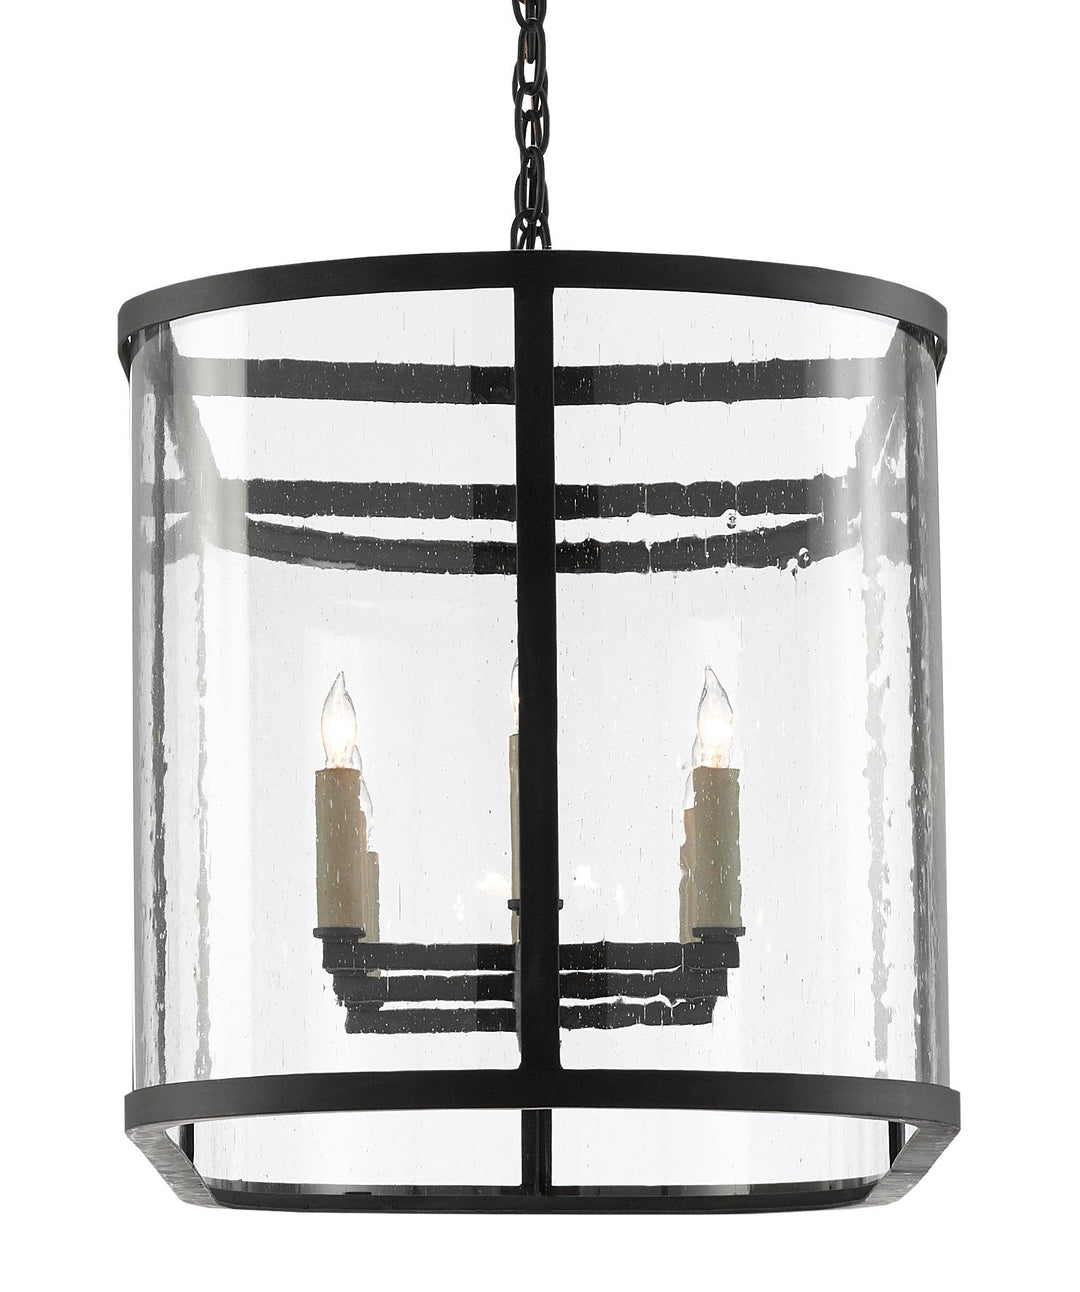 Argand Oval Chandelier - Casey & Company